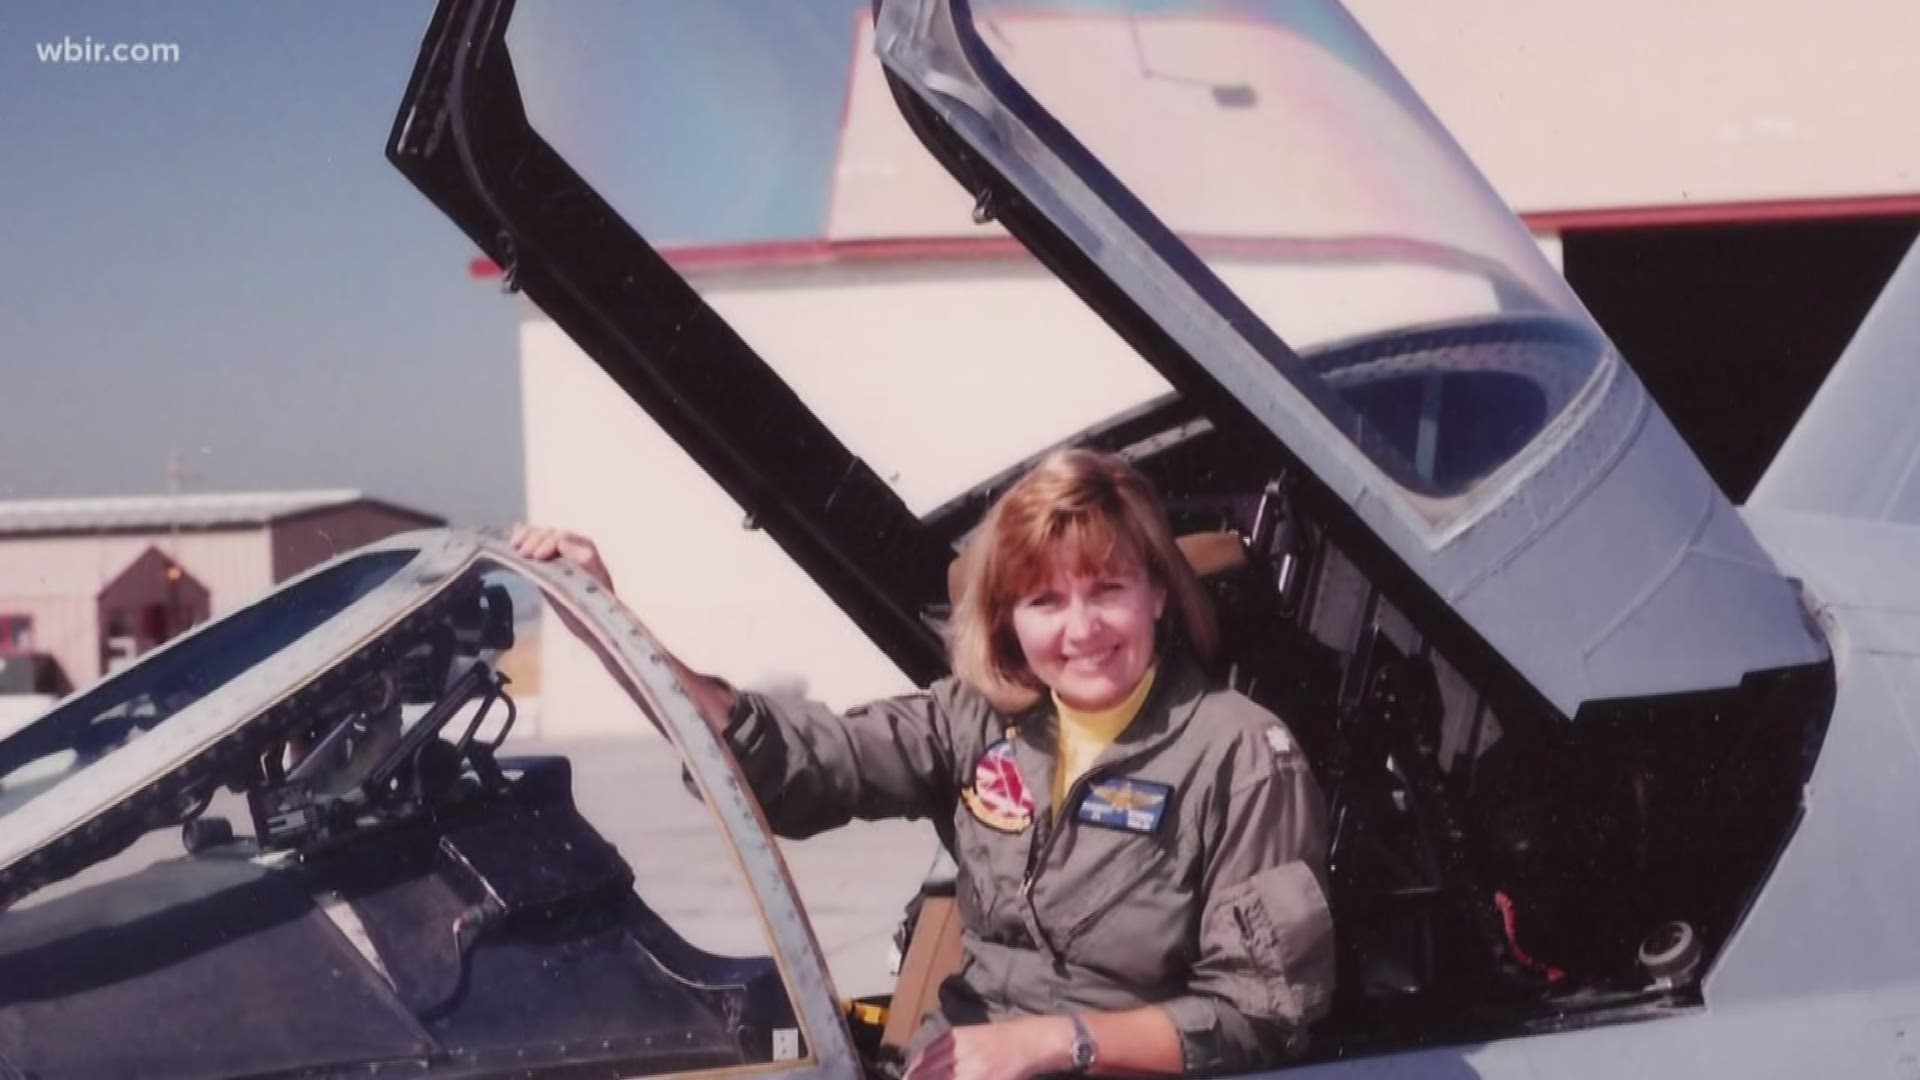 Captain Rosemary Mariner, a military trailblazer who lived in Anderson County, was laid to rest Saturday after a long battle with ovarian cancer. She died at the age of 65 on Jan. 24.